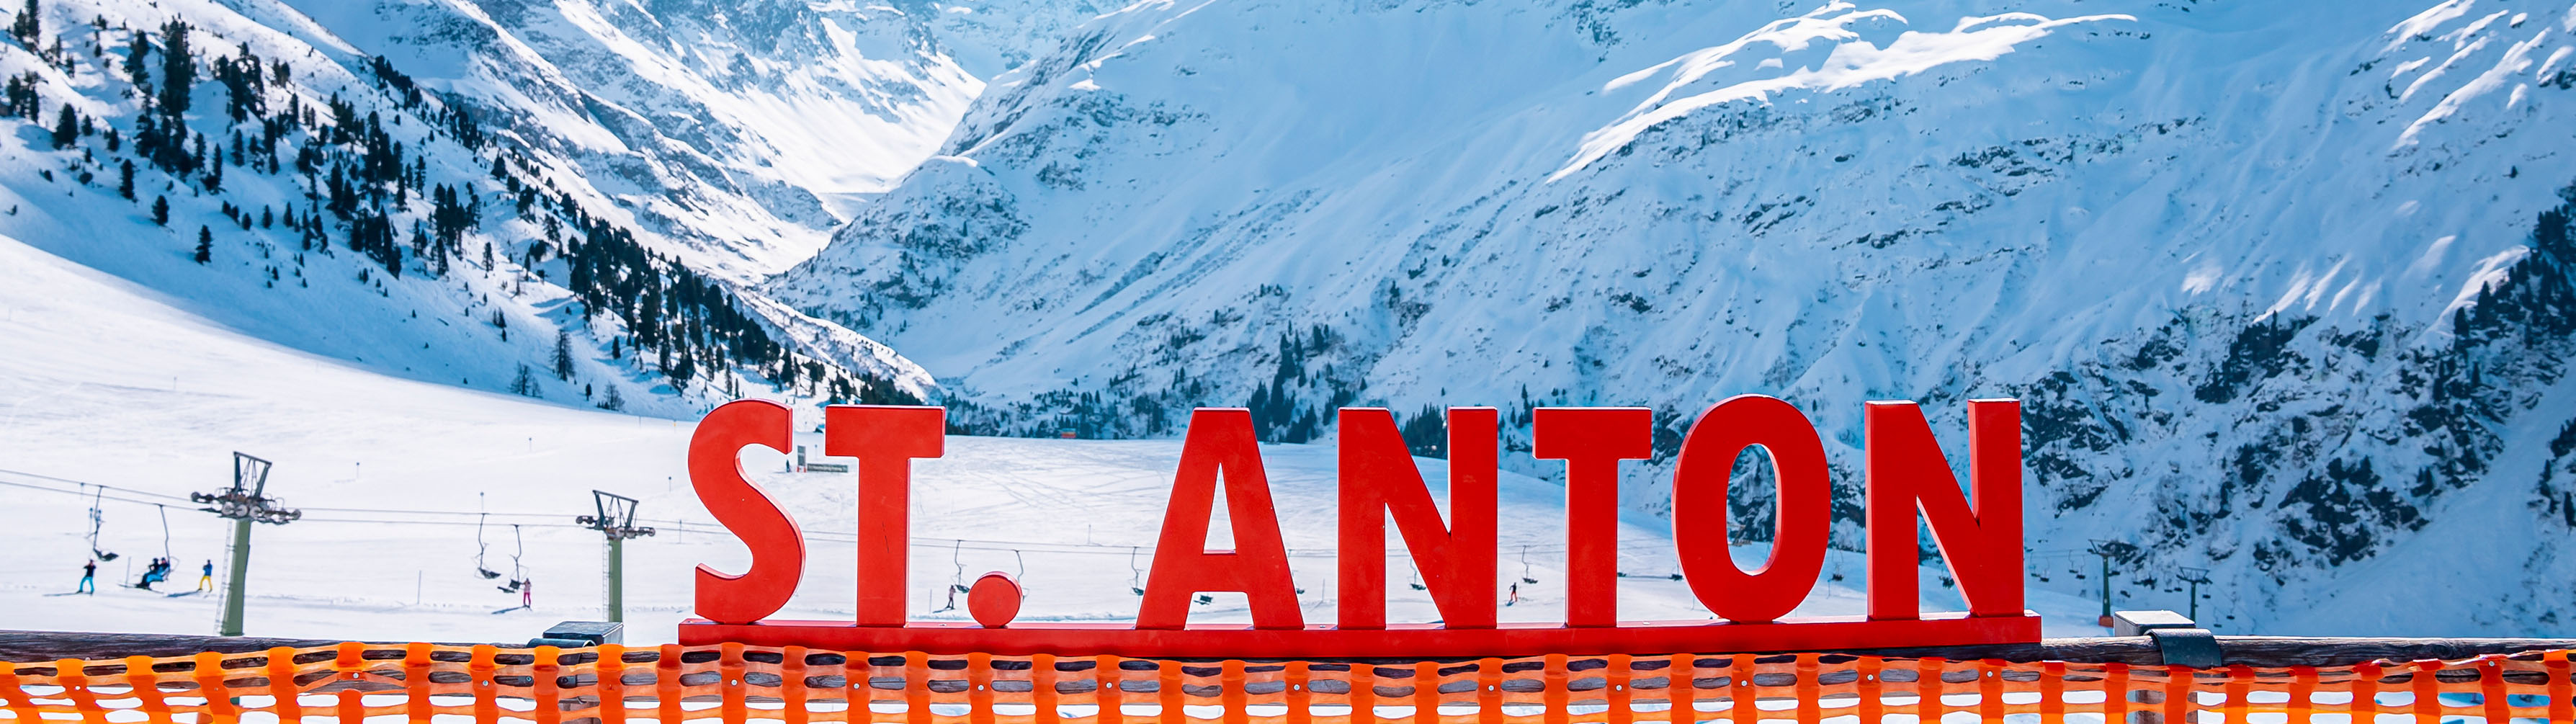 The fresh snow of St. Anton lies in the background with the name of the village in the form of a huge red sign dominating the foreground.